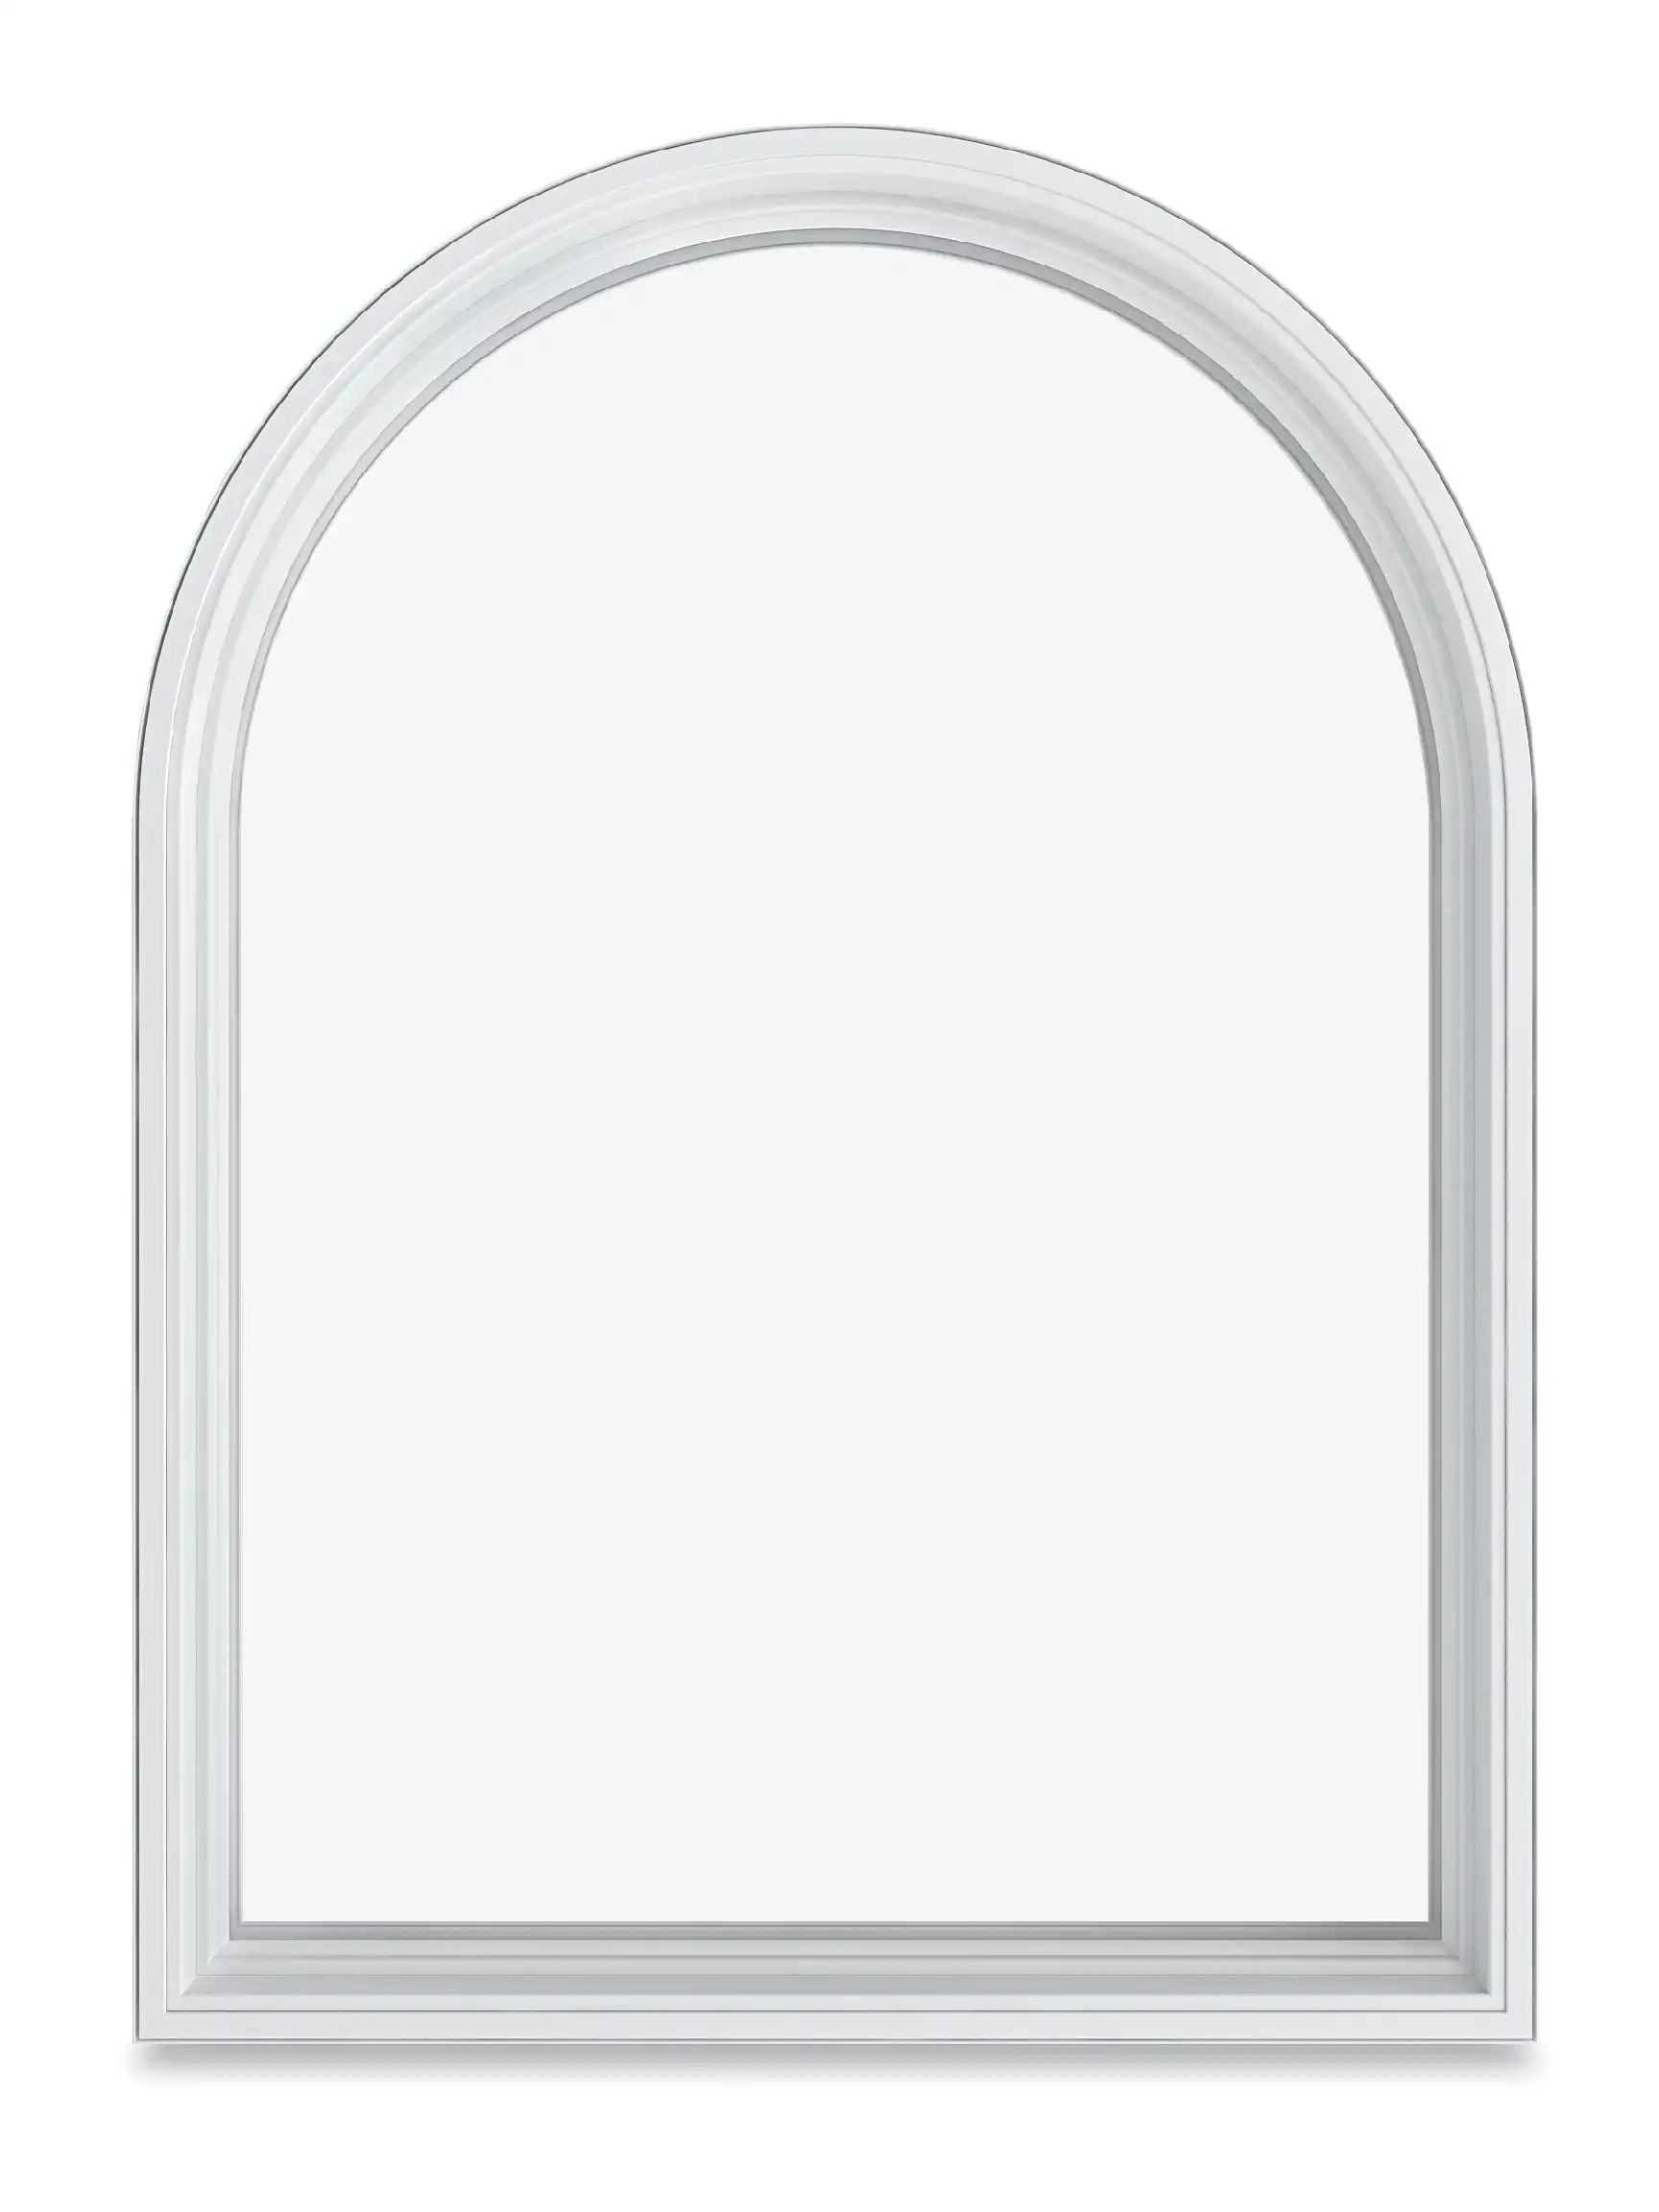 Image of a Marvin Replacement Round Top window in the Half Round Above Springline style.